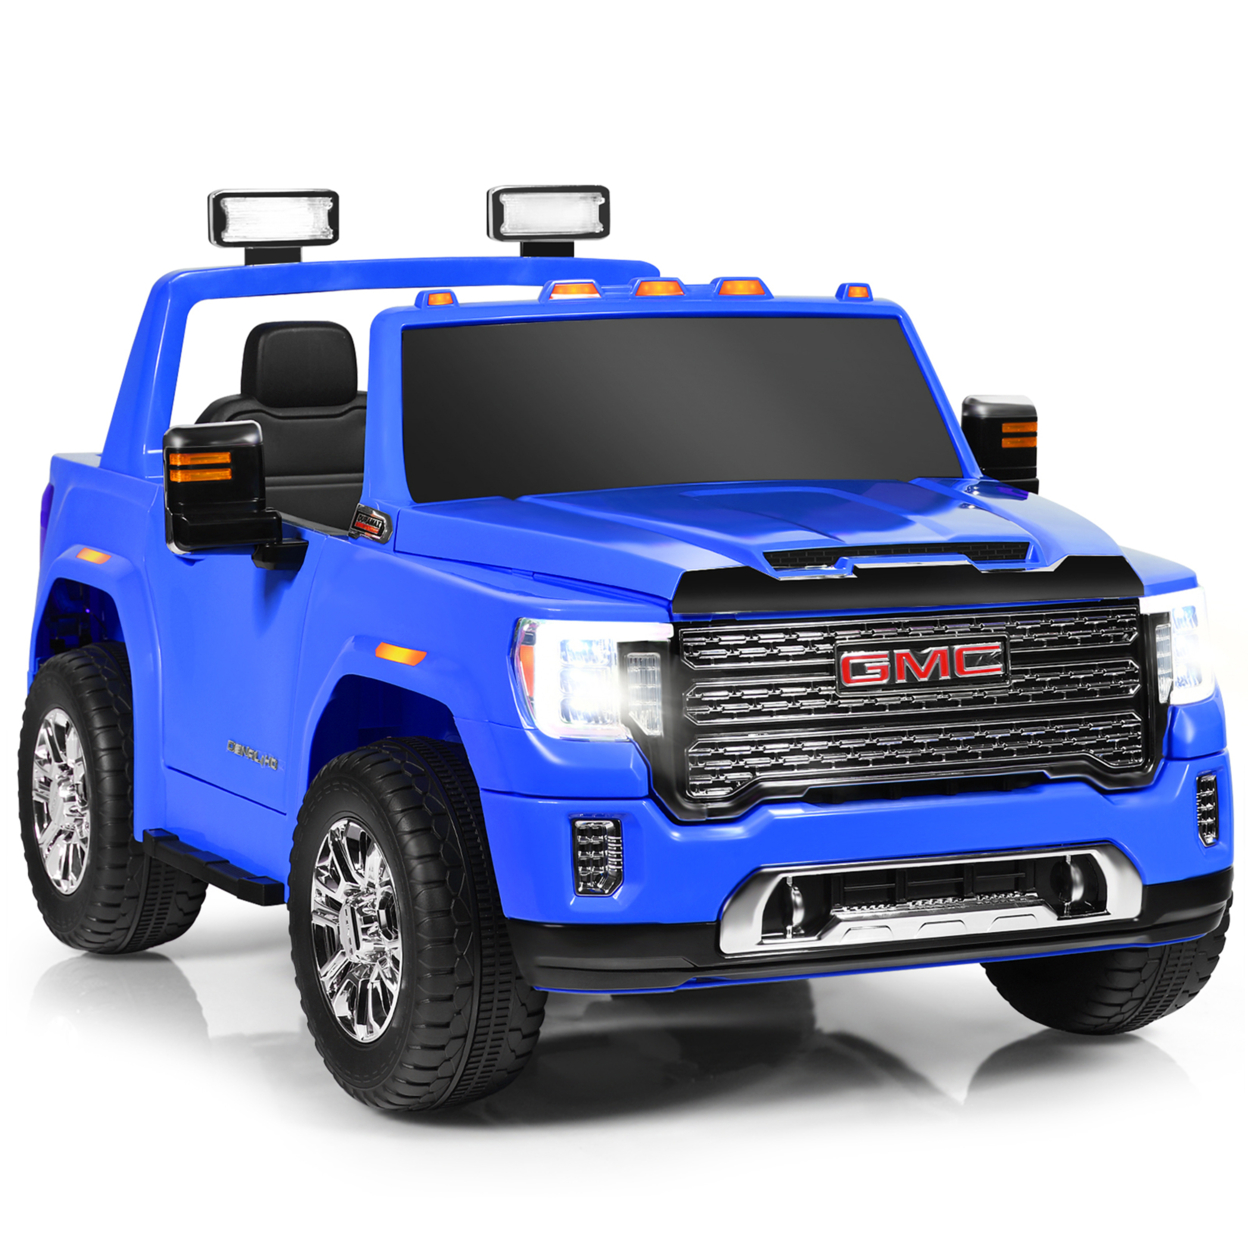 12V Licensed GMC Kids Ride On Car 2-Seater Truck W/ Remote Control - Blue